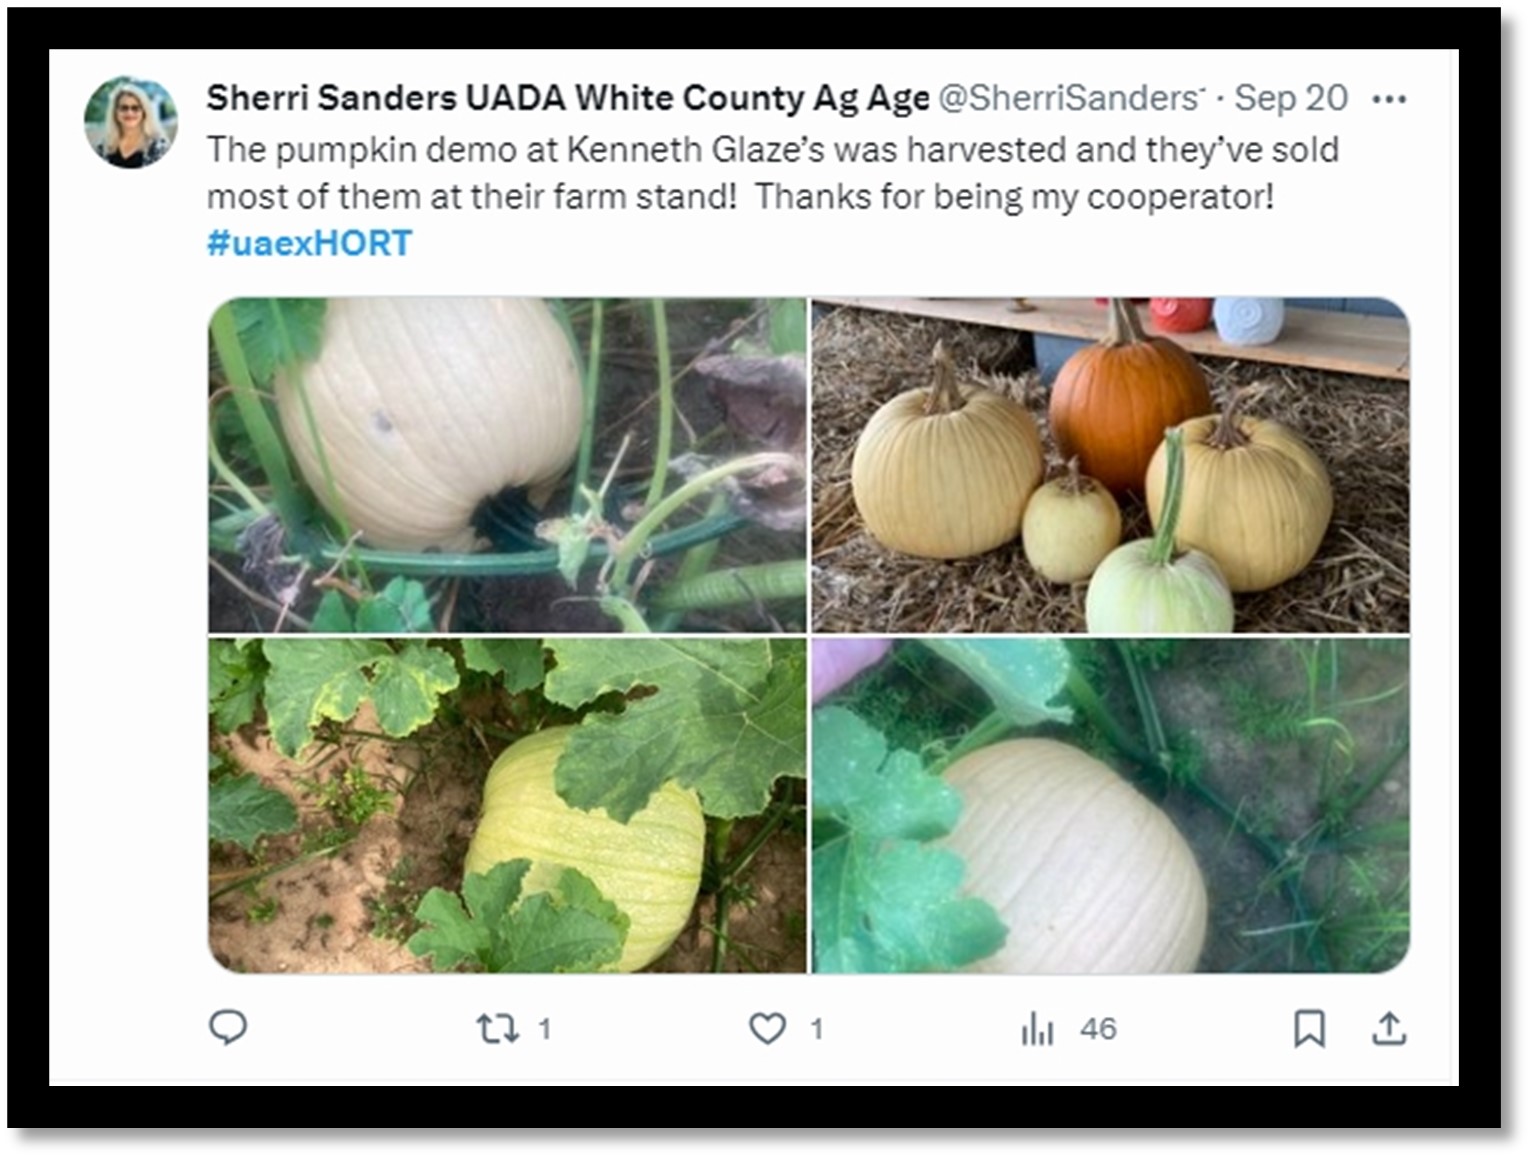 Figure 6. Sherri Sanders posted an update to X, formerly Twitter, on Sept. 20th which highlighted the harvest of the pumpkin demonstration. You can see the three different varieties in the top right corner. She used the hashtag, #uaexHORT and impacted 46 different users with her post.